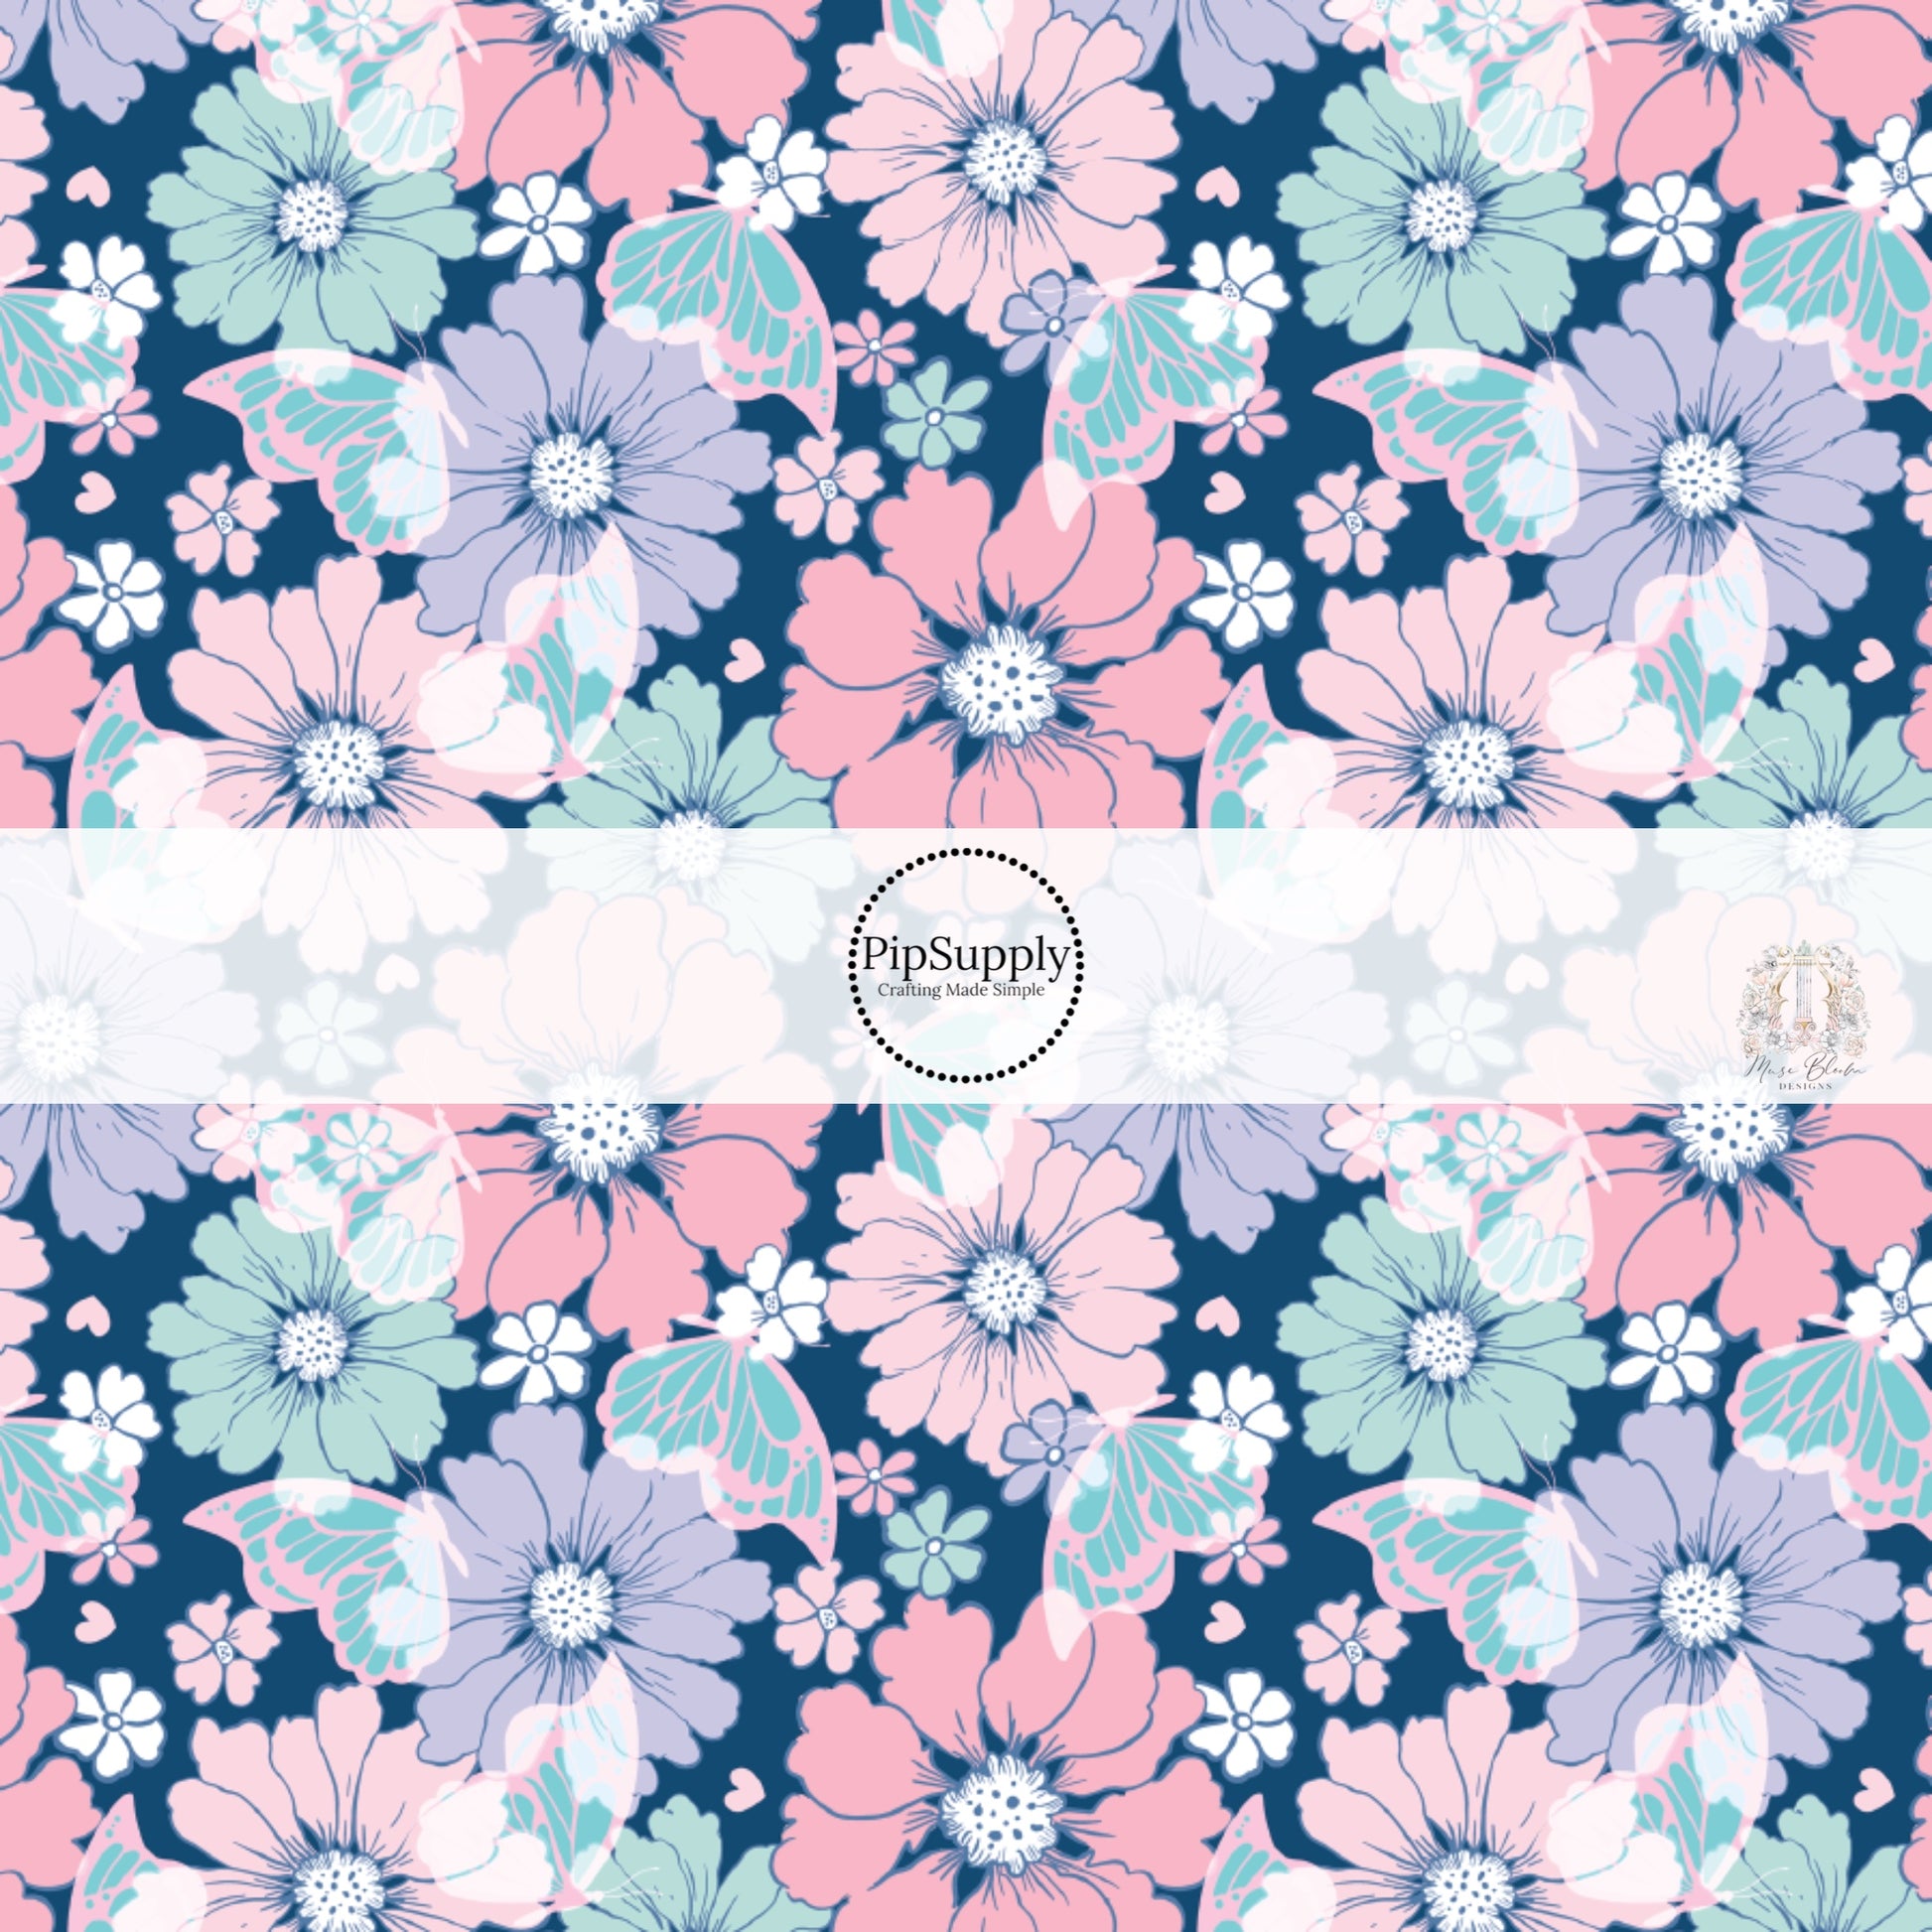 Pastel flowers in pink, aqua, purple, and white with aqua butterflies on dark navy blue fabric by the yard.